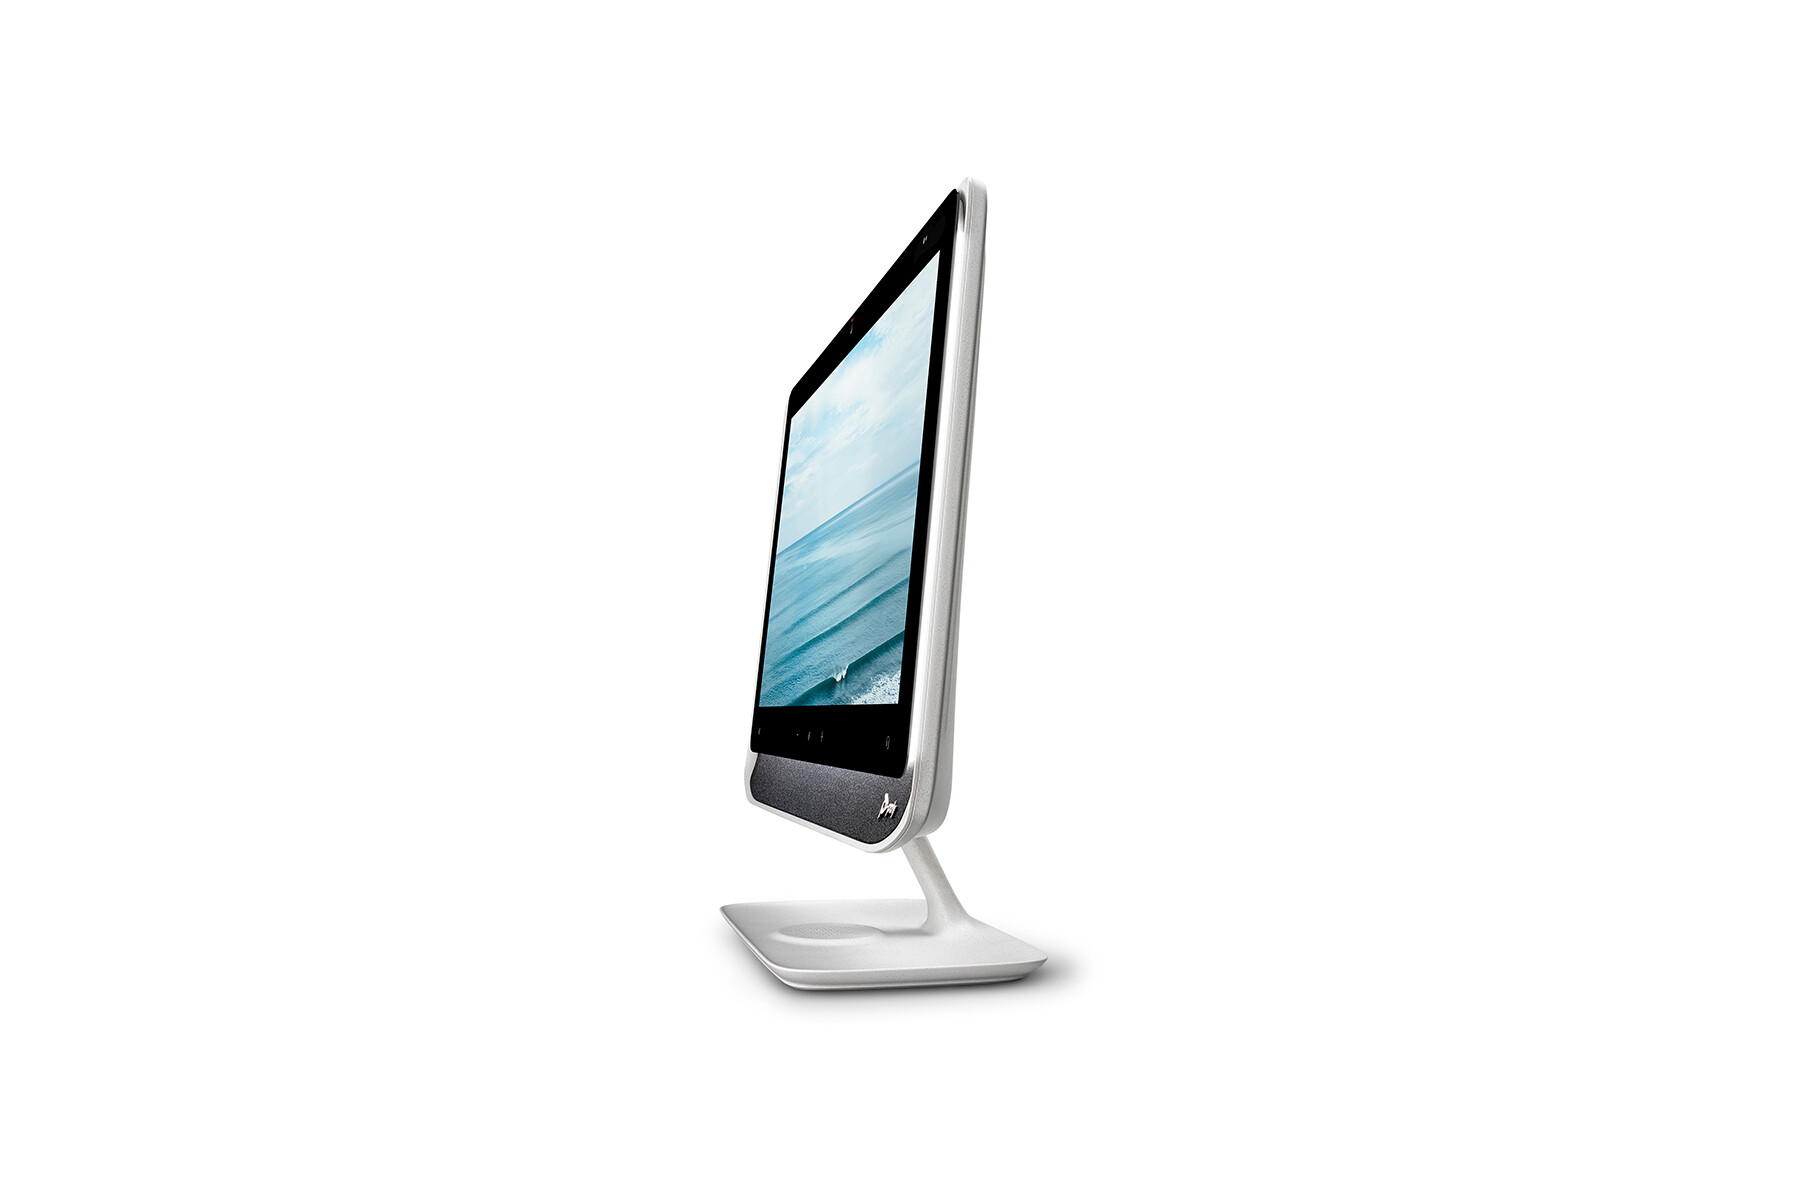 Poly-Studio-P21-All-In-One-Monitor-21-5-1080p-USB-Open-Eco-System